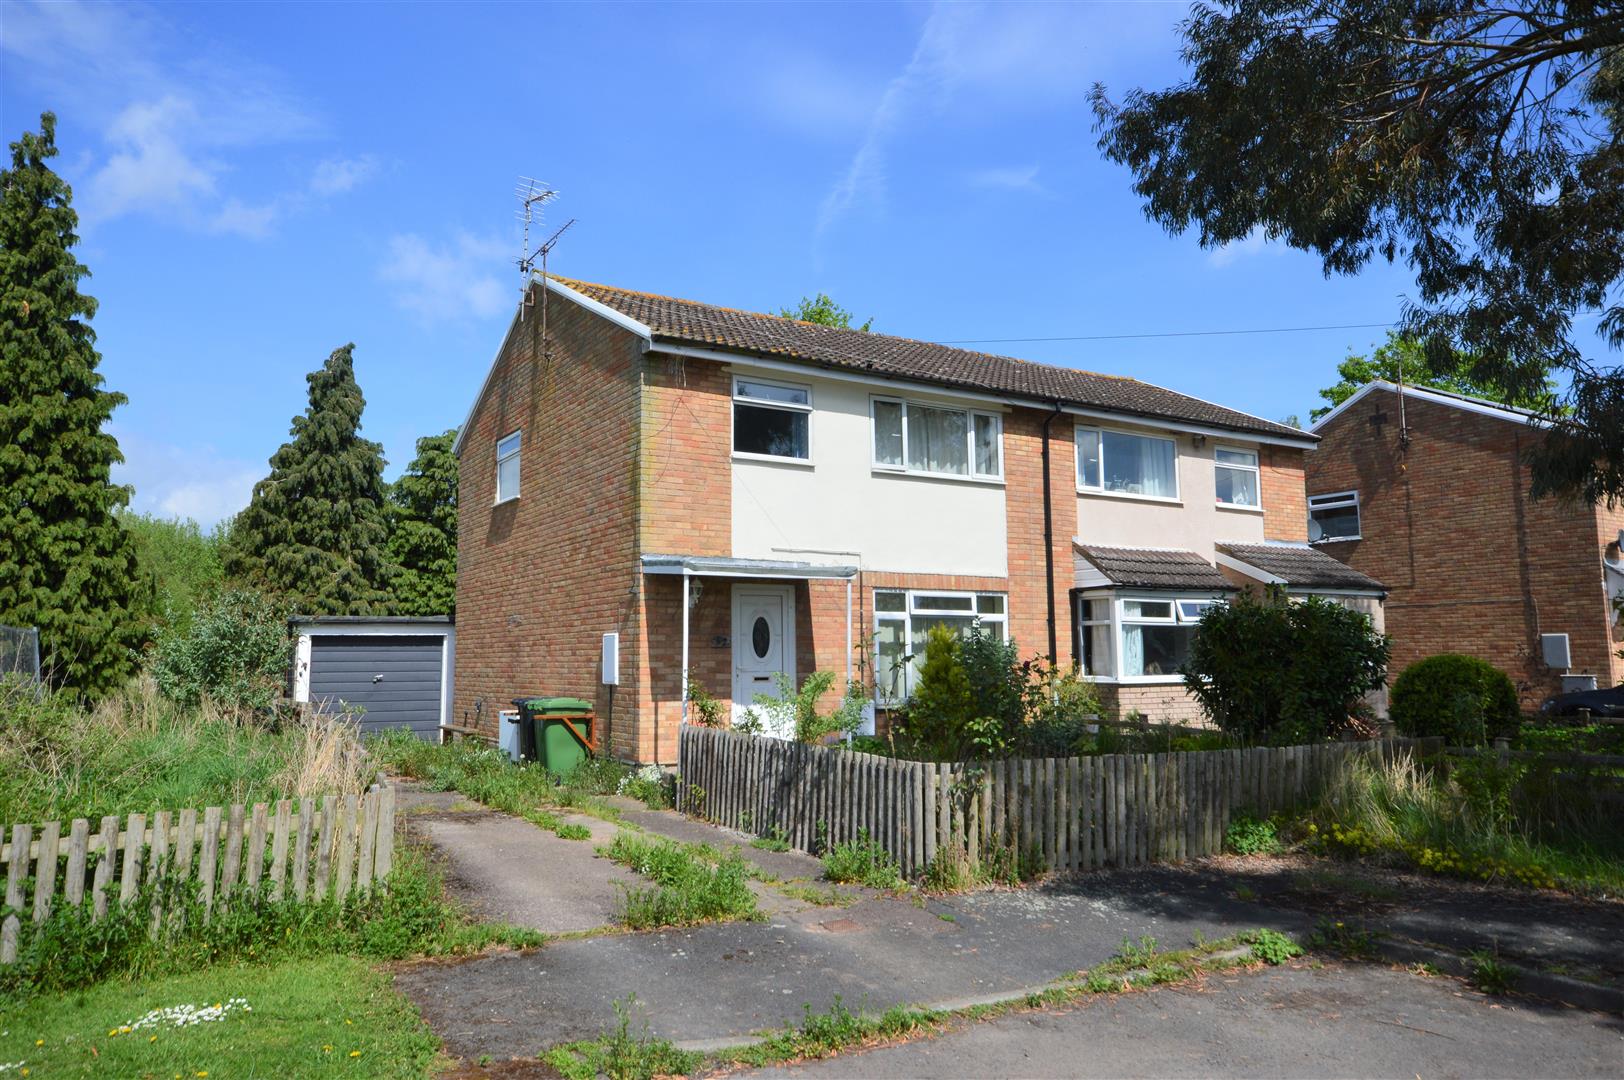 3 bed semi-detached for sale in Leominster, HR6